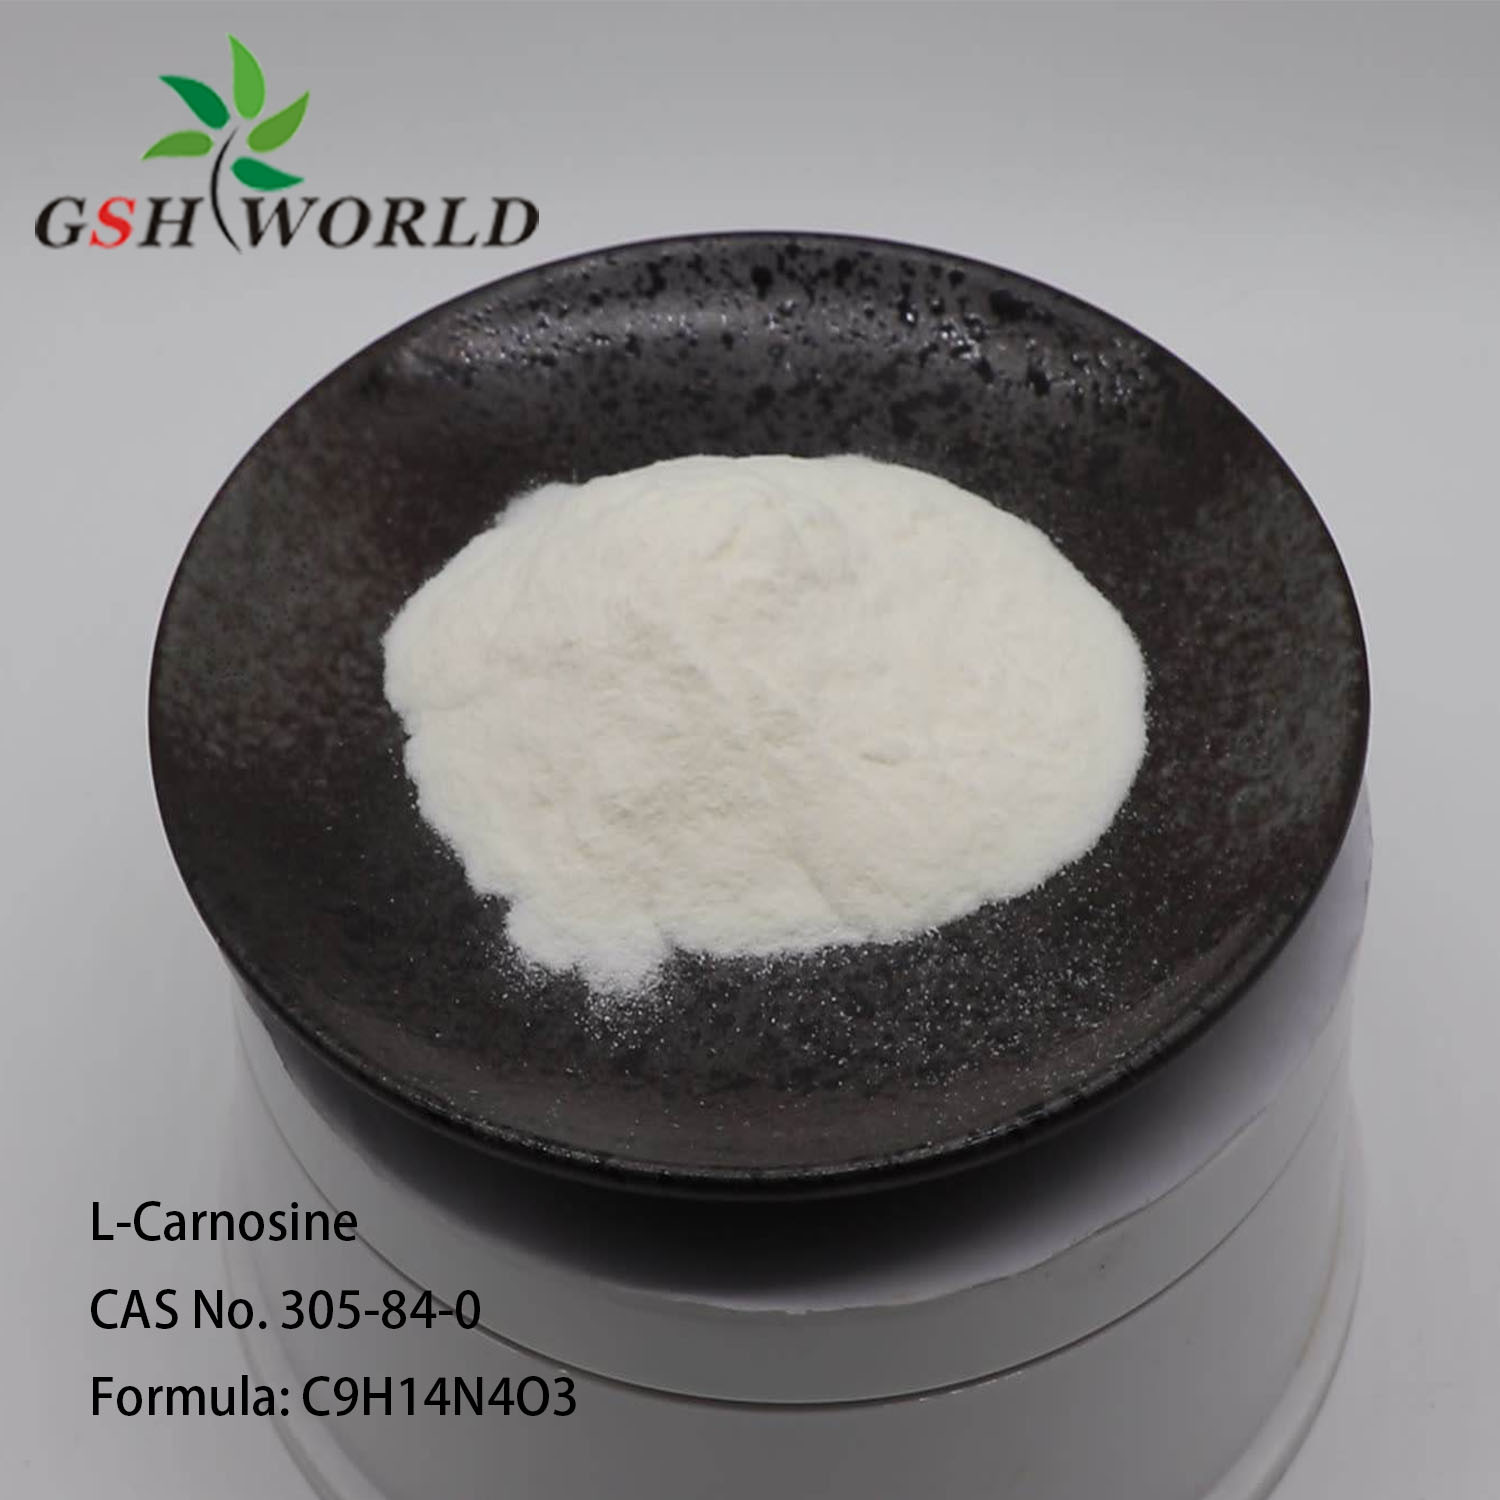 High Quality L-Carnosine, Factory Price, 98% Purity, Food Grade Material CAS 305-84-0 suppliers & manufacturers in China